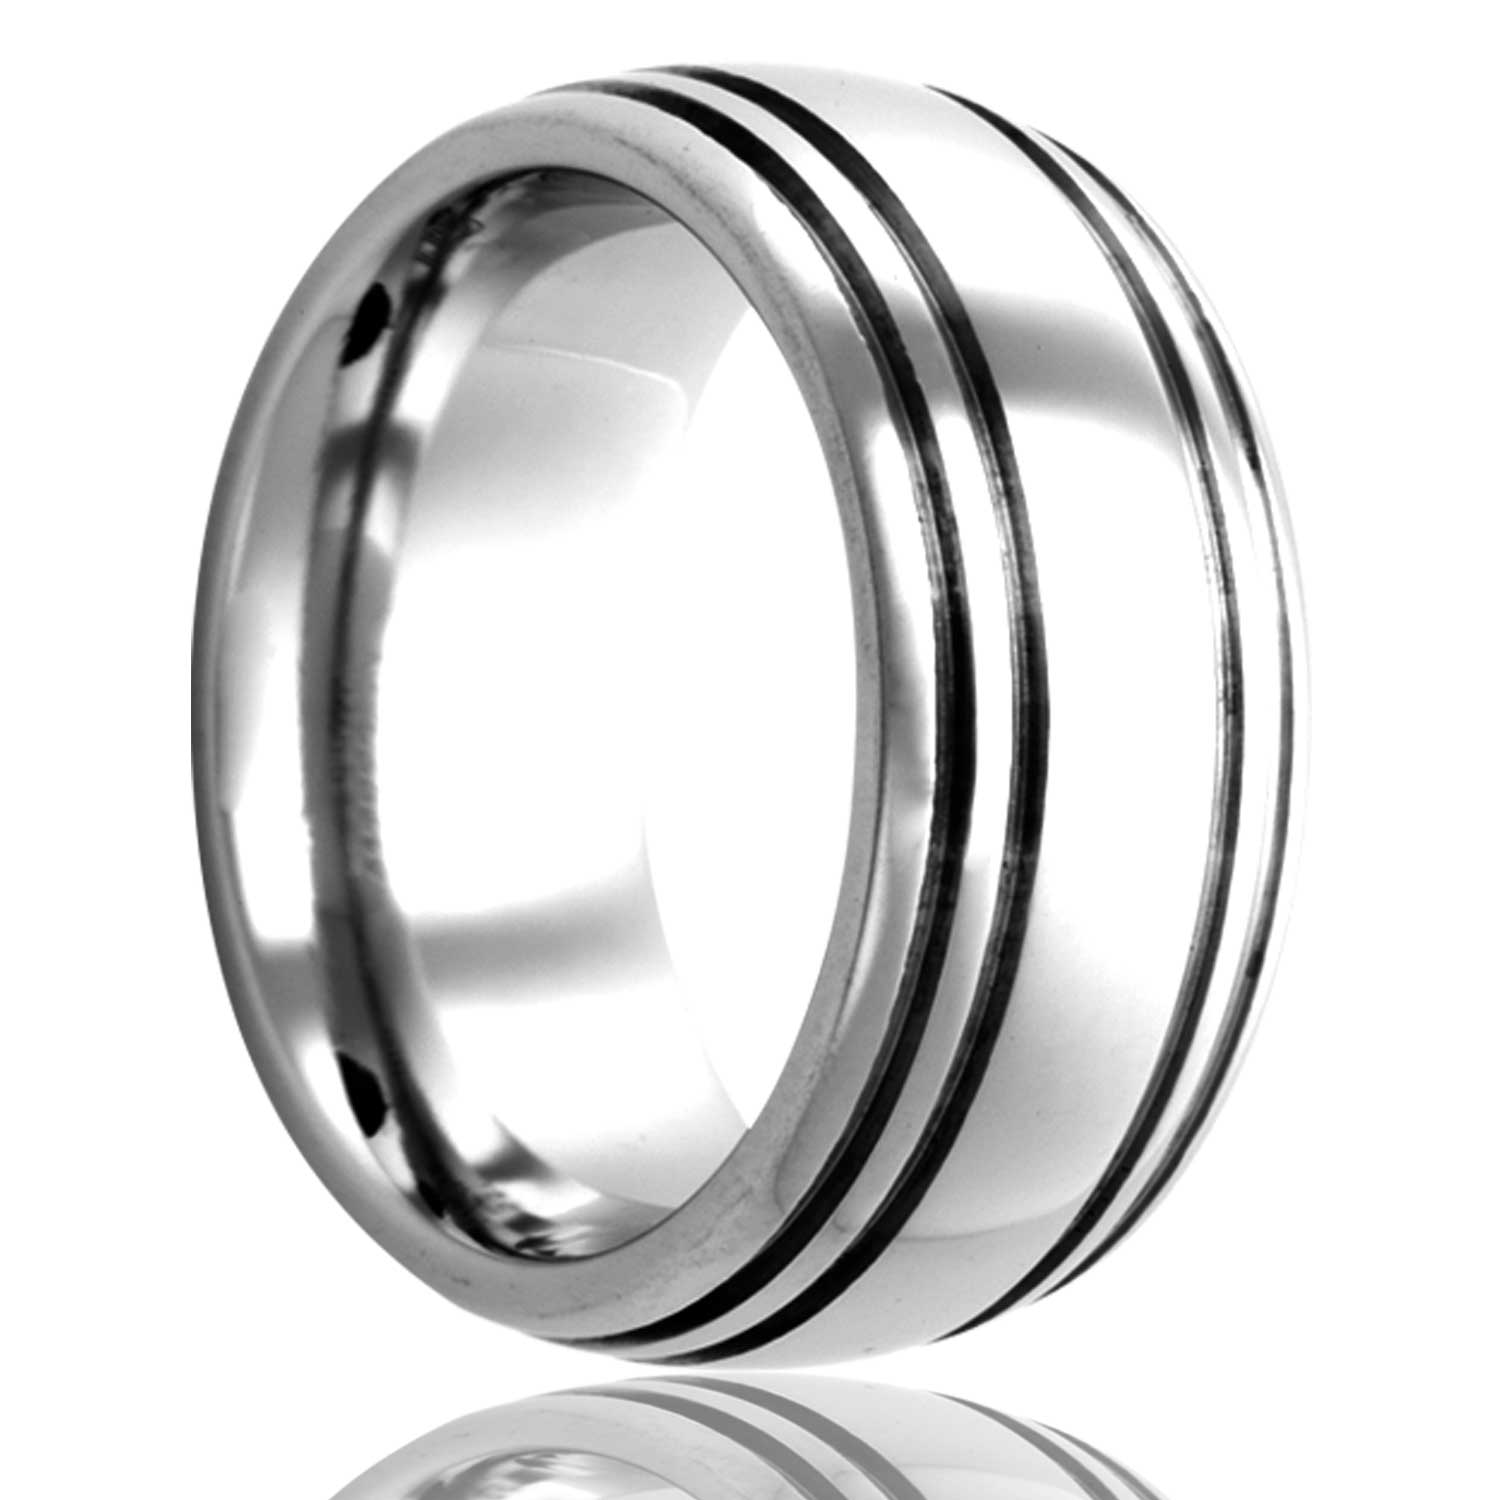 A domed cobalt wedding band with quadruple grooves displayed on a neutral white background.